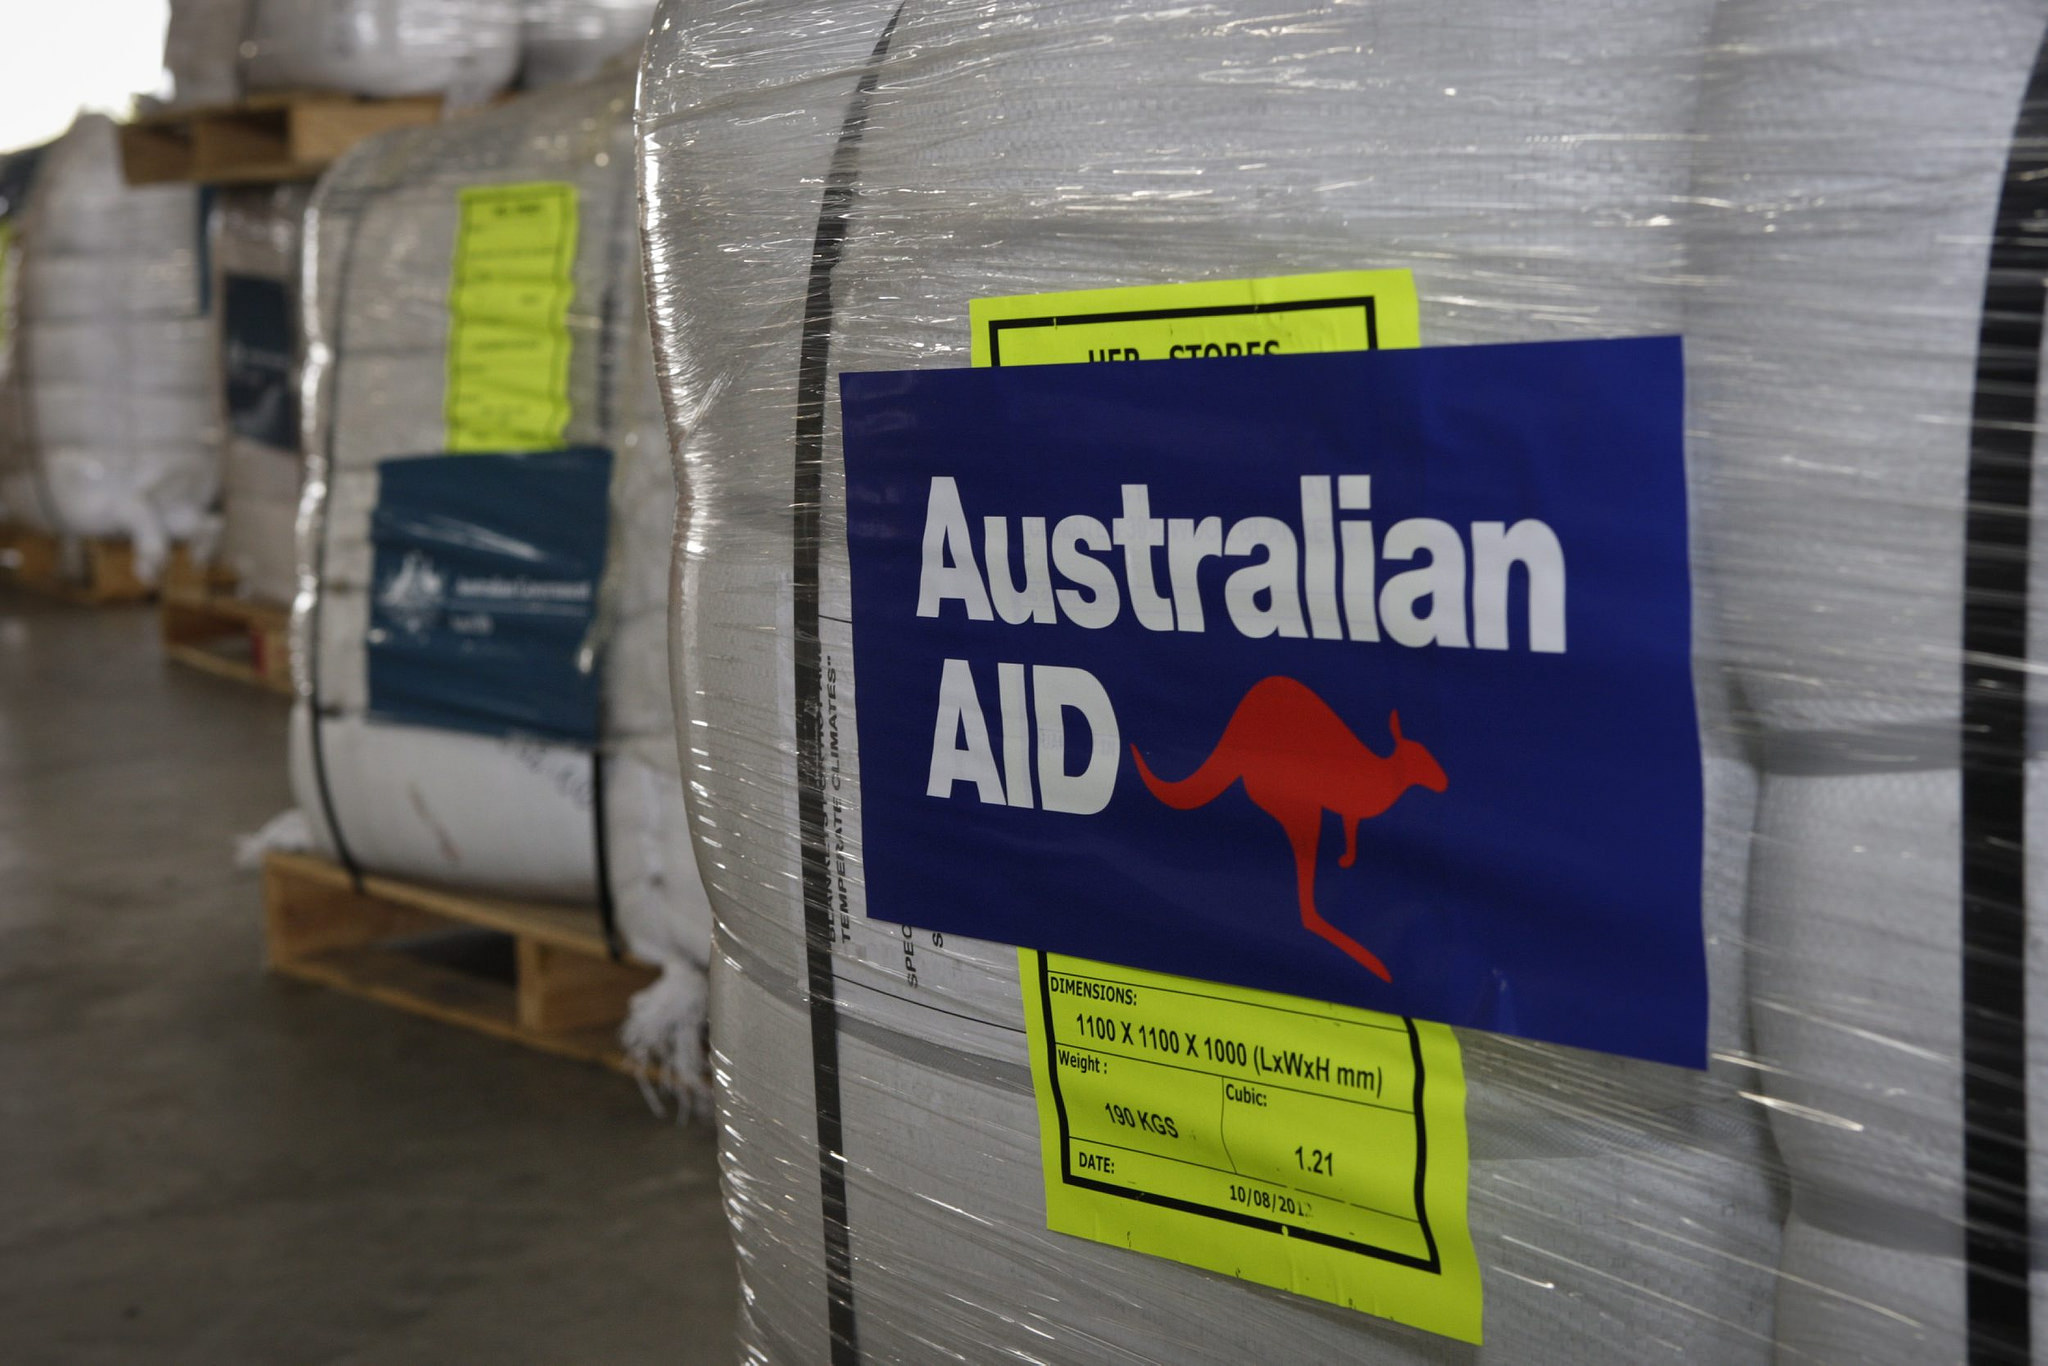 Pallets for AusAid emergency aid supplies are prepared for delivery to cyclone ravaged Fiji (DFAT/Flickr/CC BY 2.0)